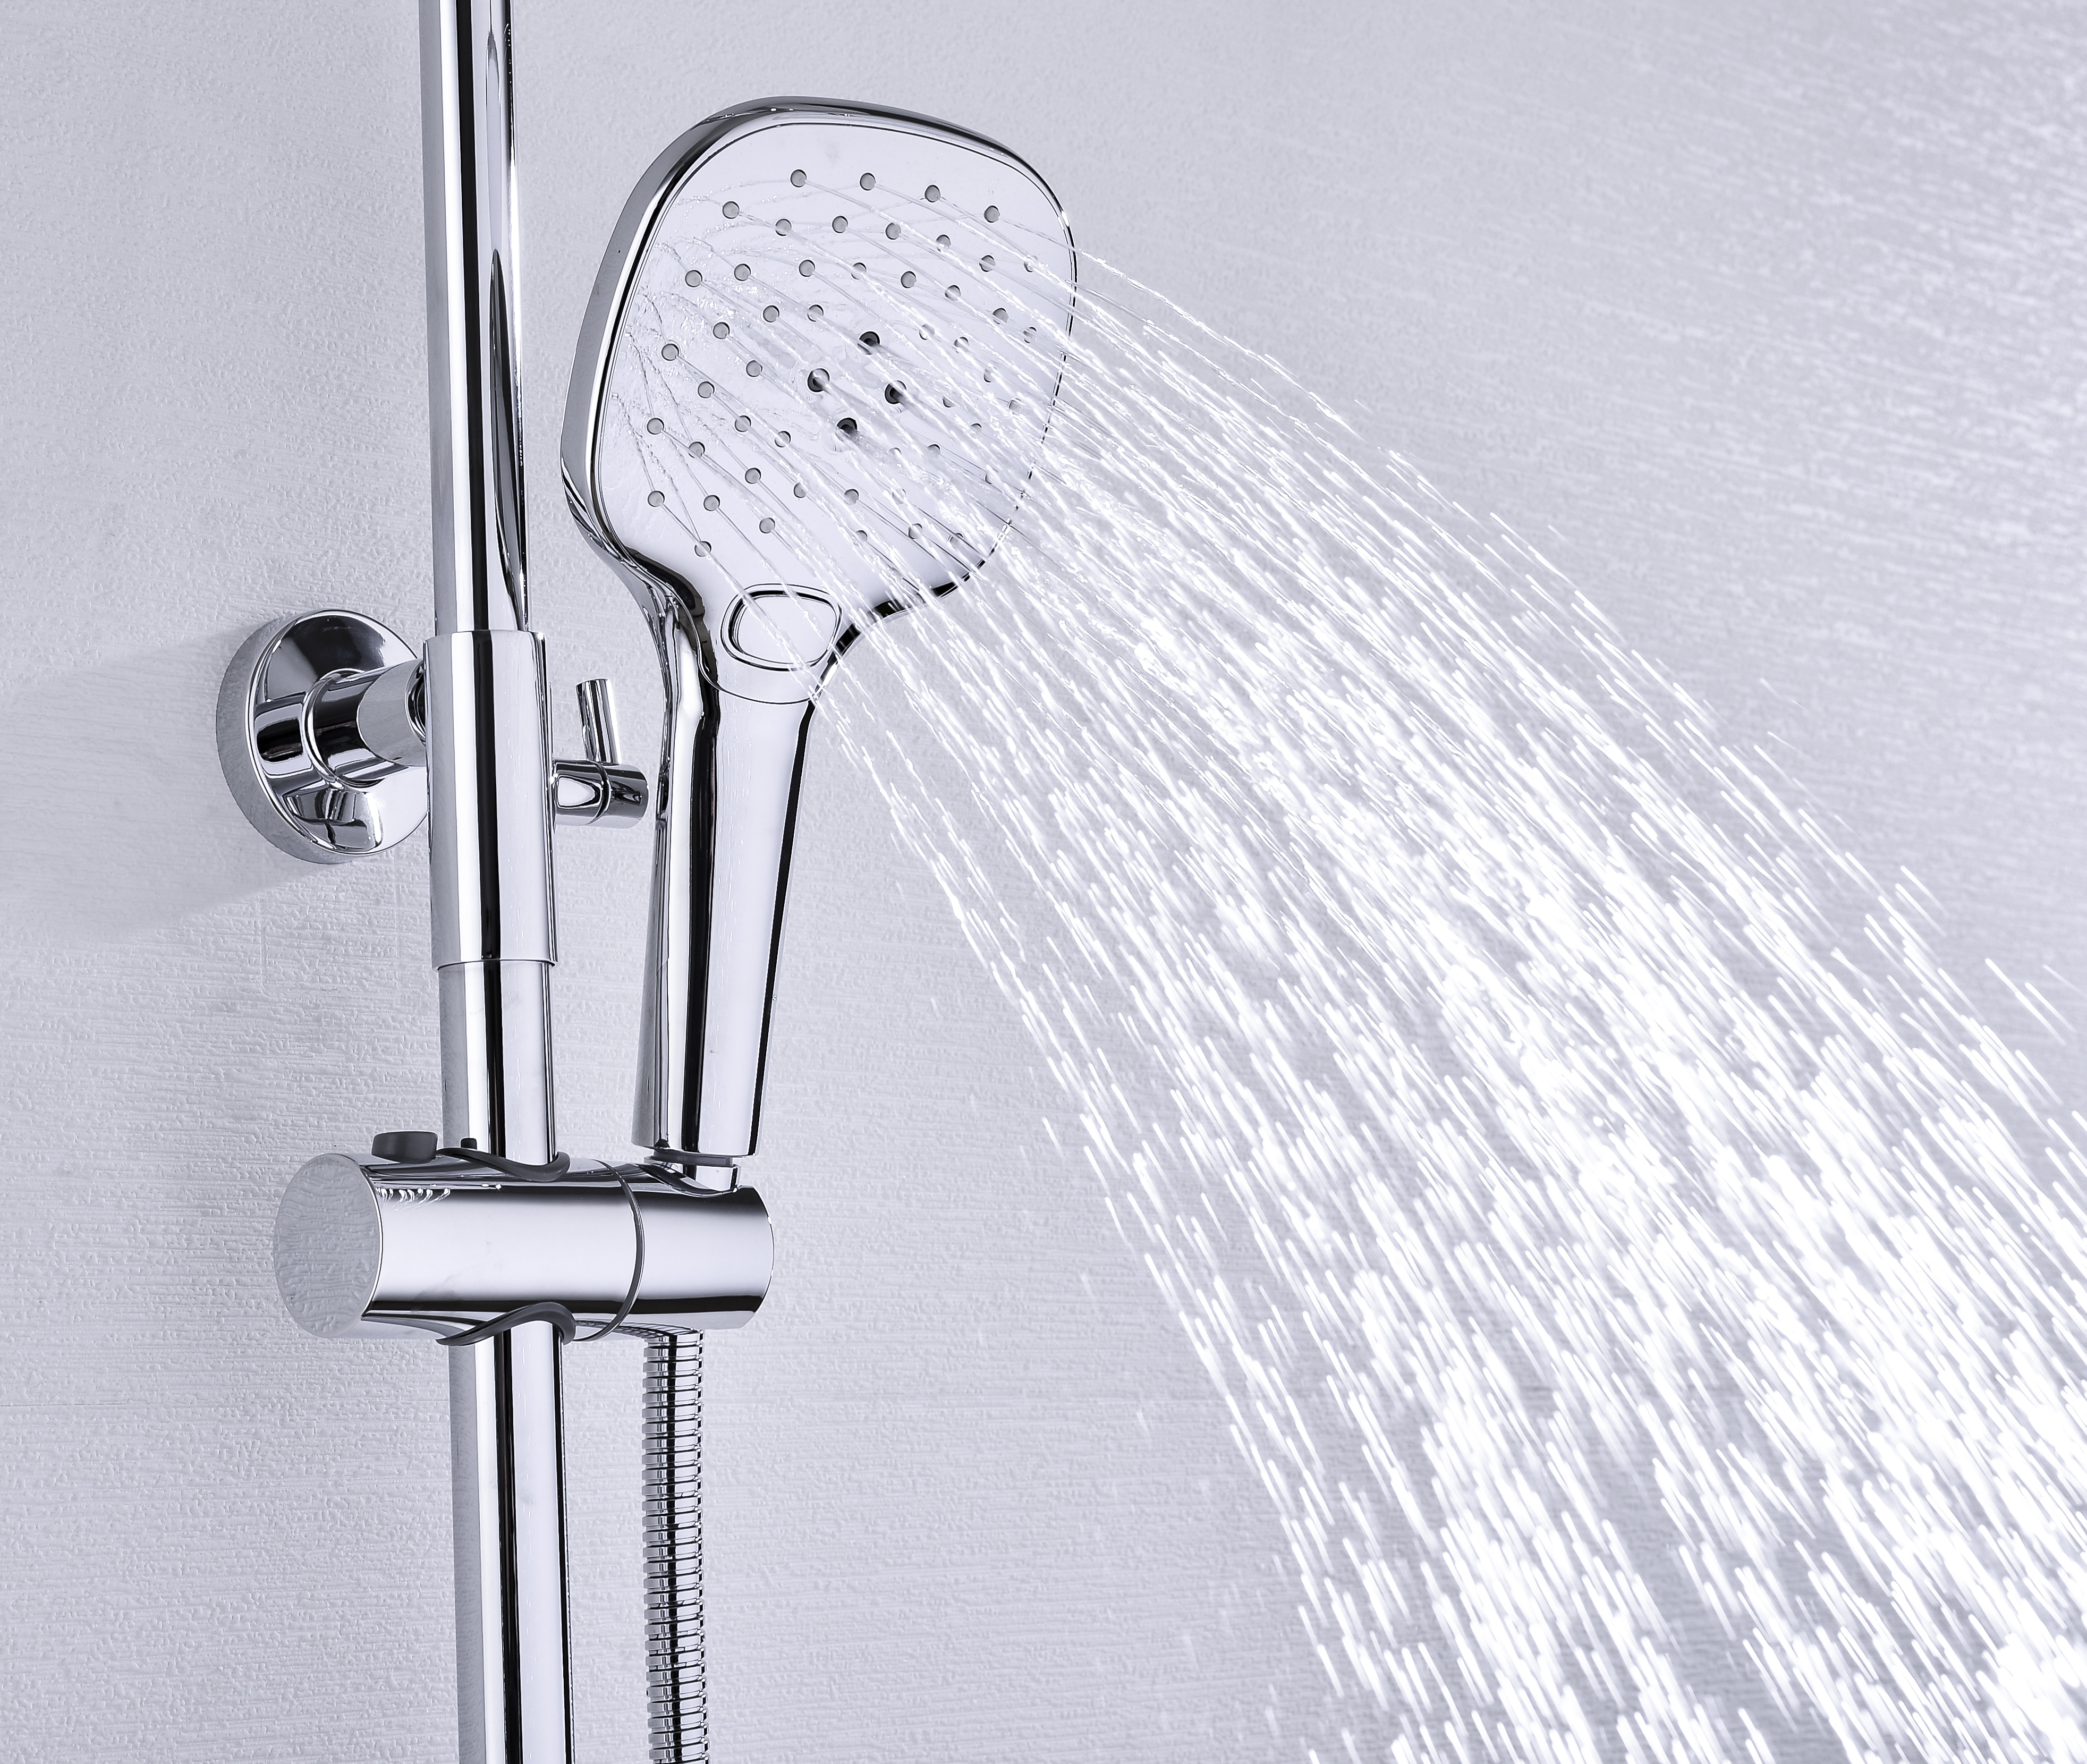 we are the reliable shower head supplier